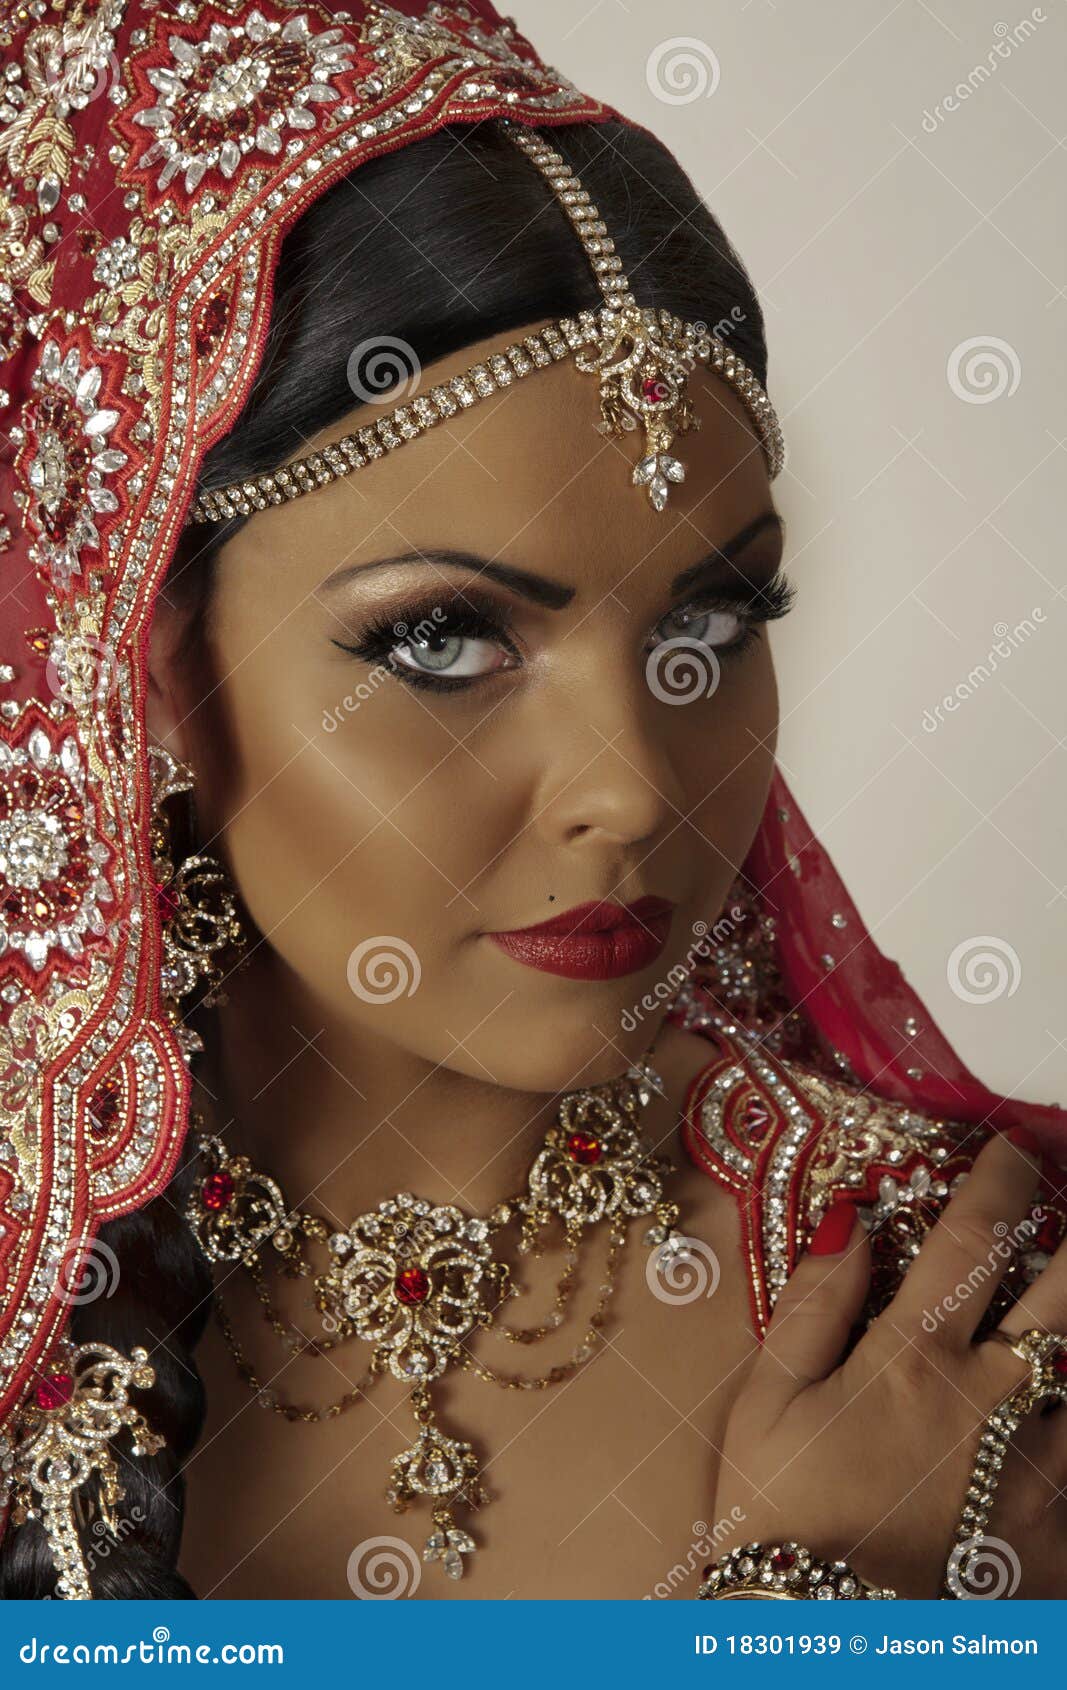  Indian  Model  Royalty Free Stock Images Image 18301939